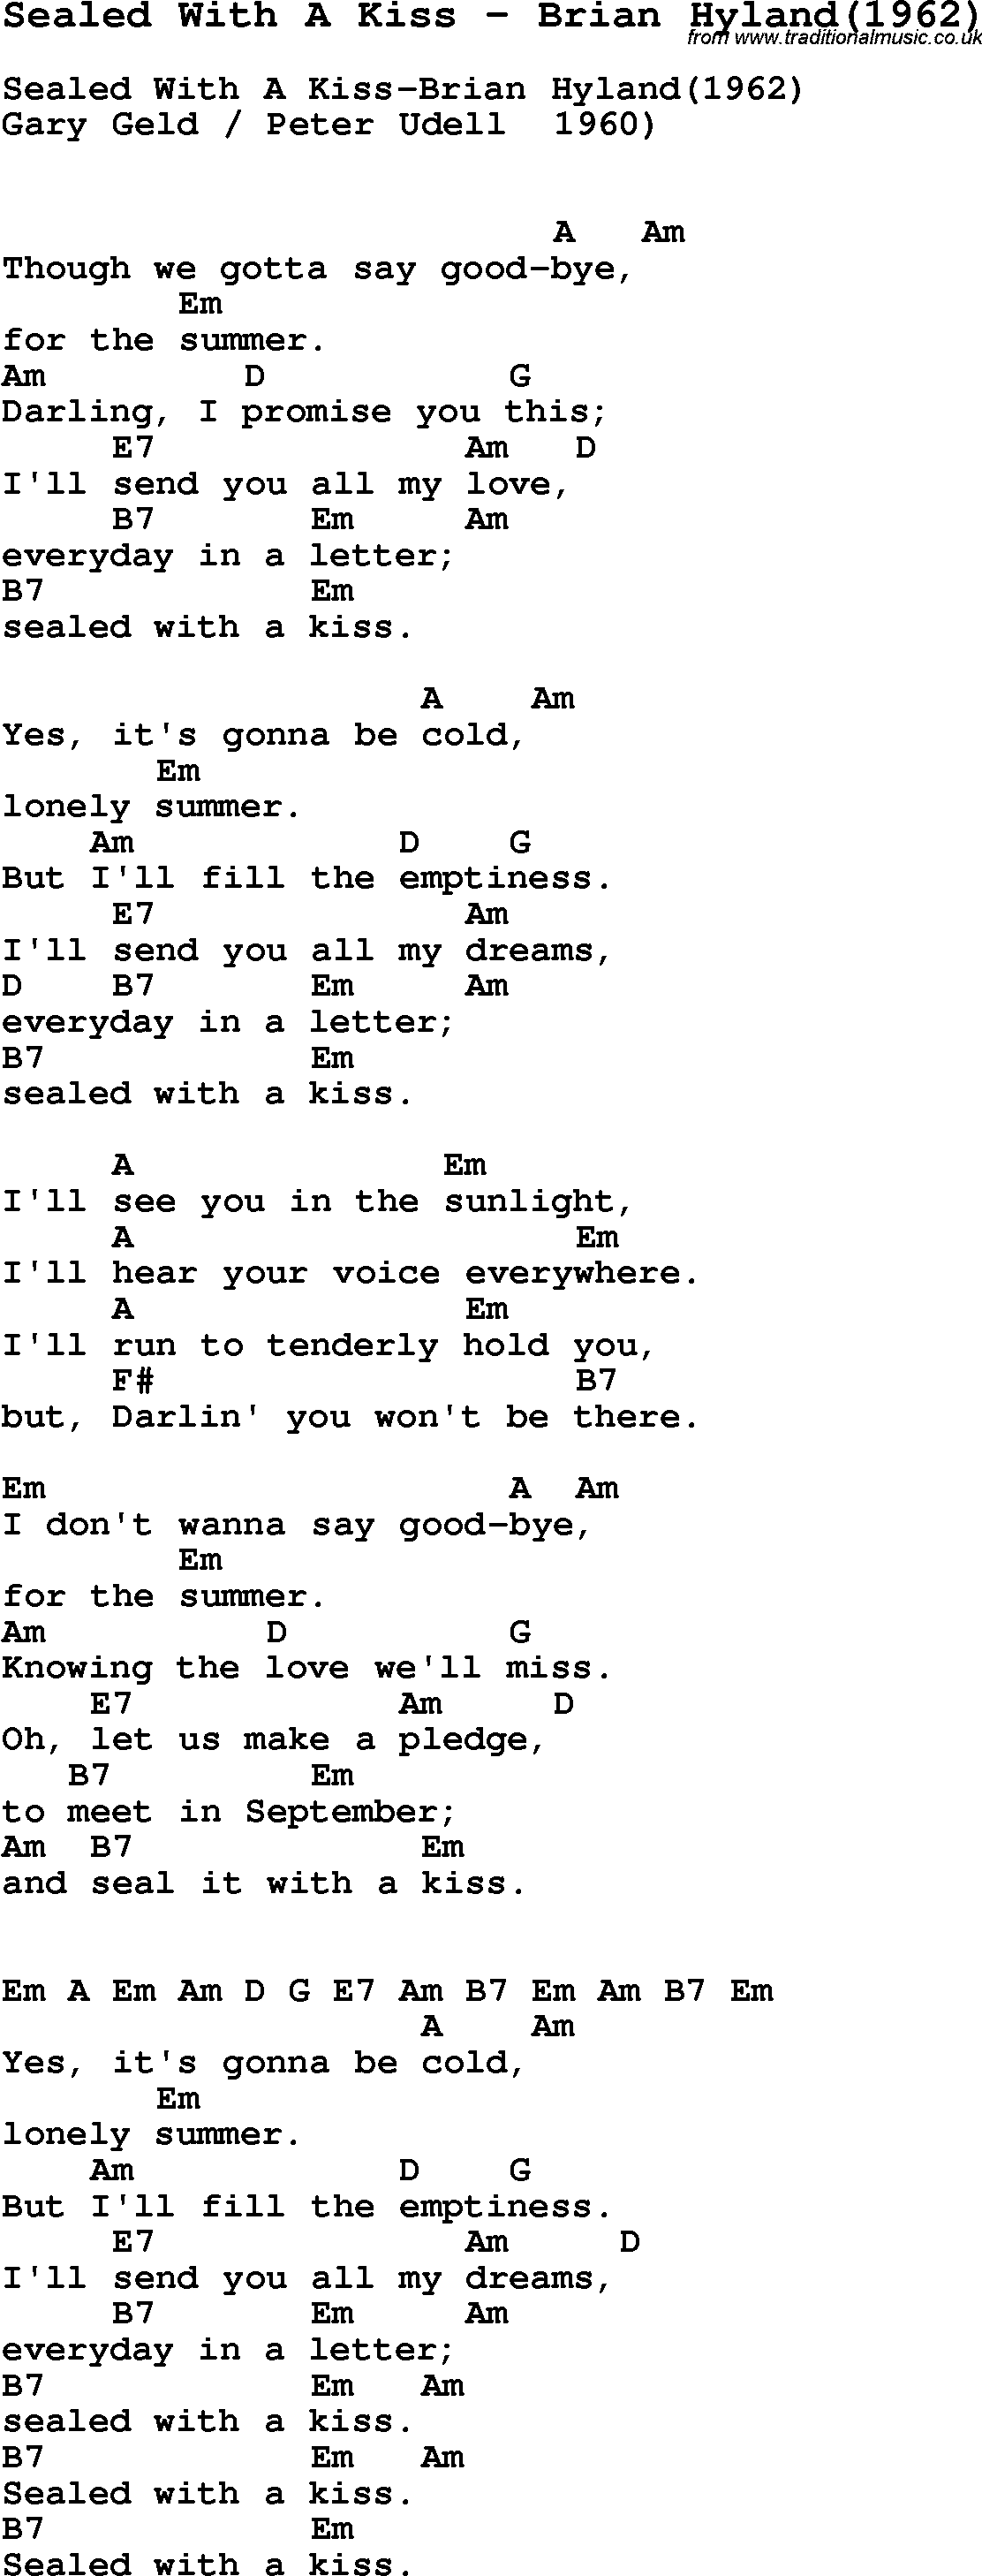 Song Sealed With A Kiss by Brian Hyland(1962), with lyrics for vocal performance and accompaniment chords for Ukulele, Guitar Banjo etc.